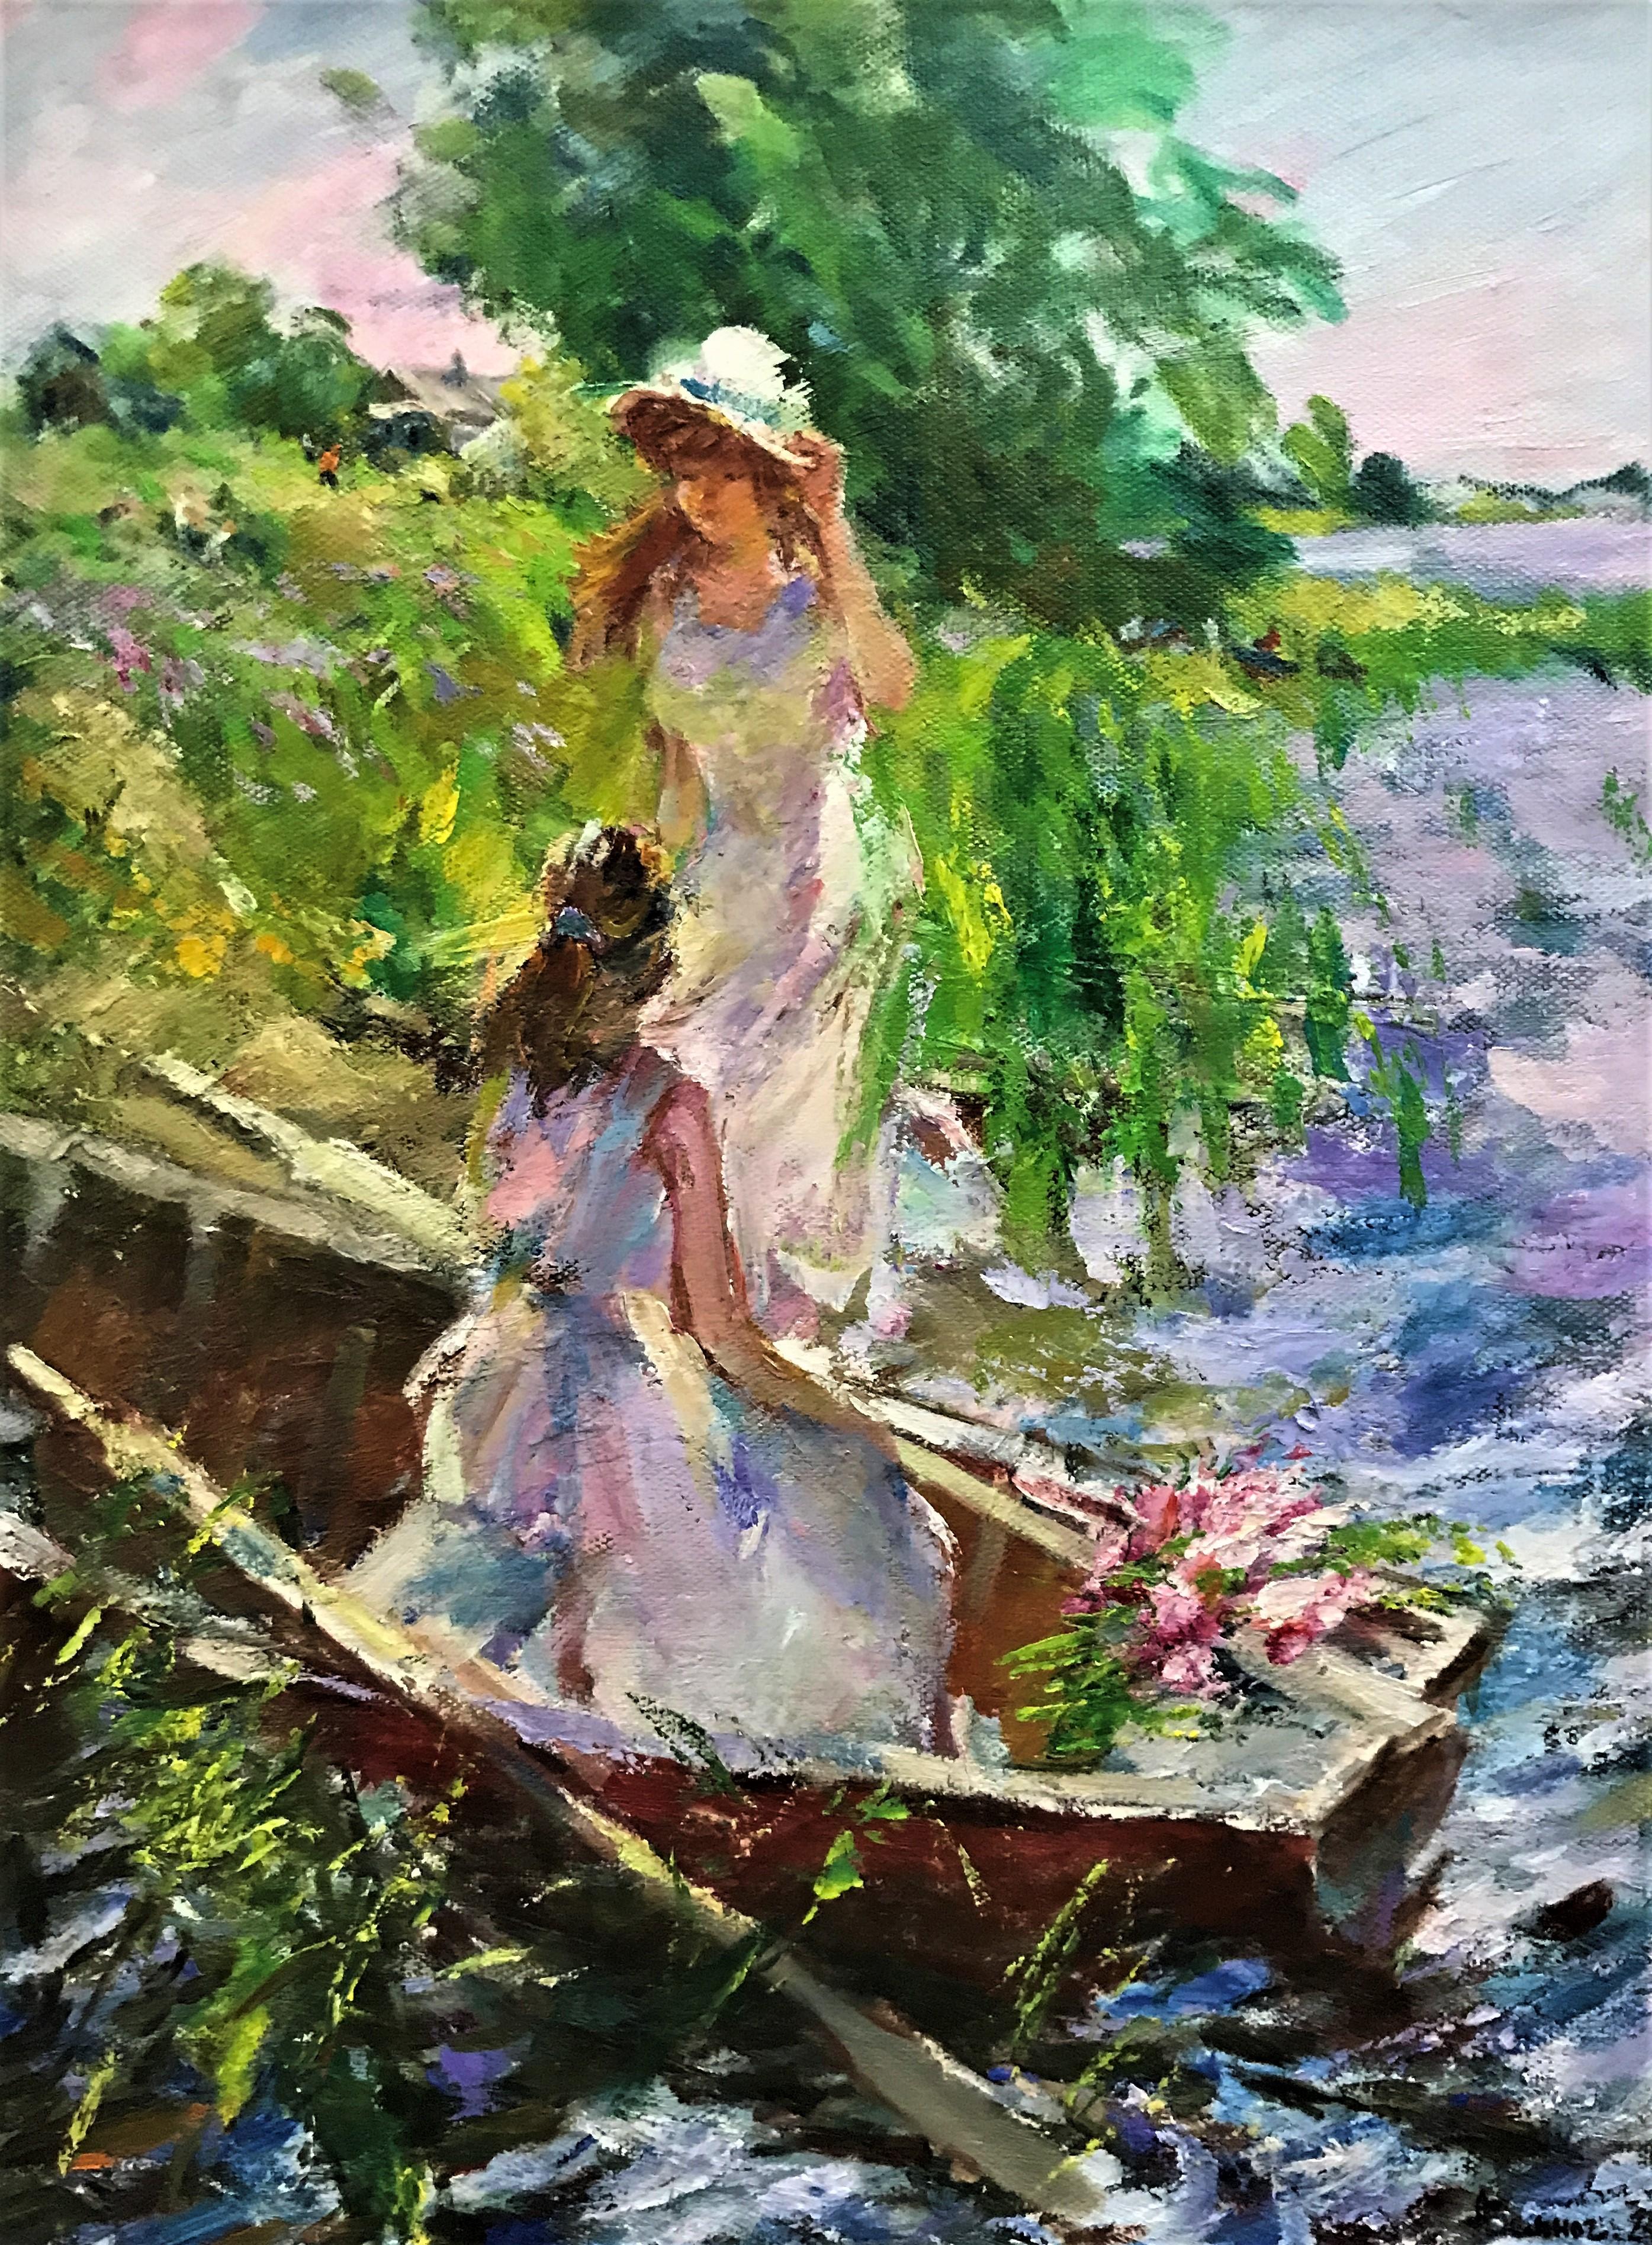 Anatoly Belonog Figurative Painting - Beautiful Day by the River, original Oil on Canvas, Impressionist, 20thCentury